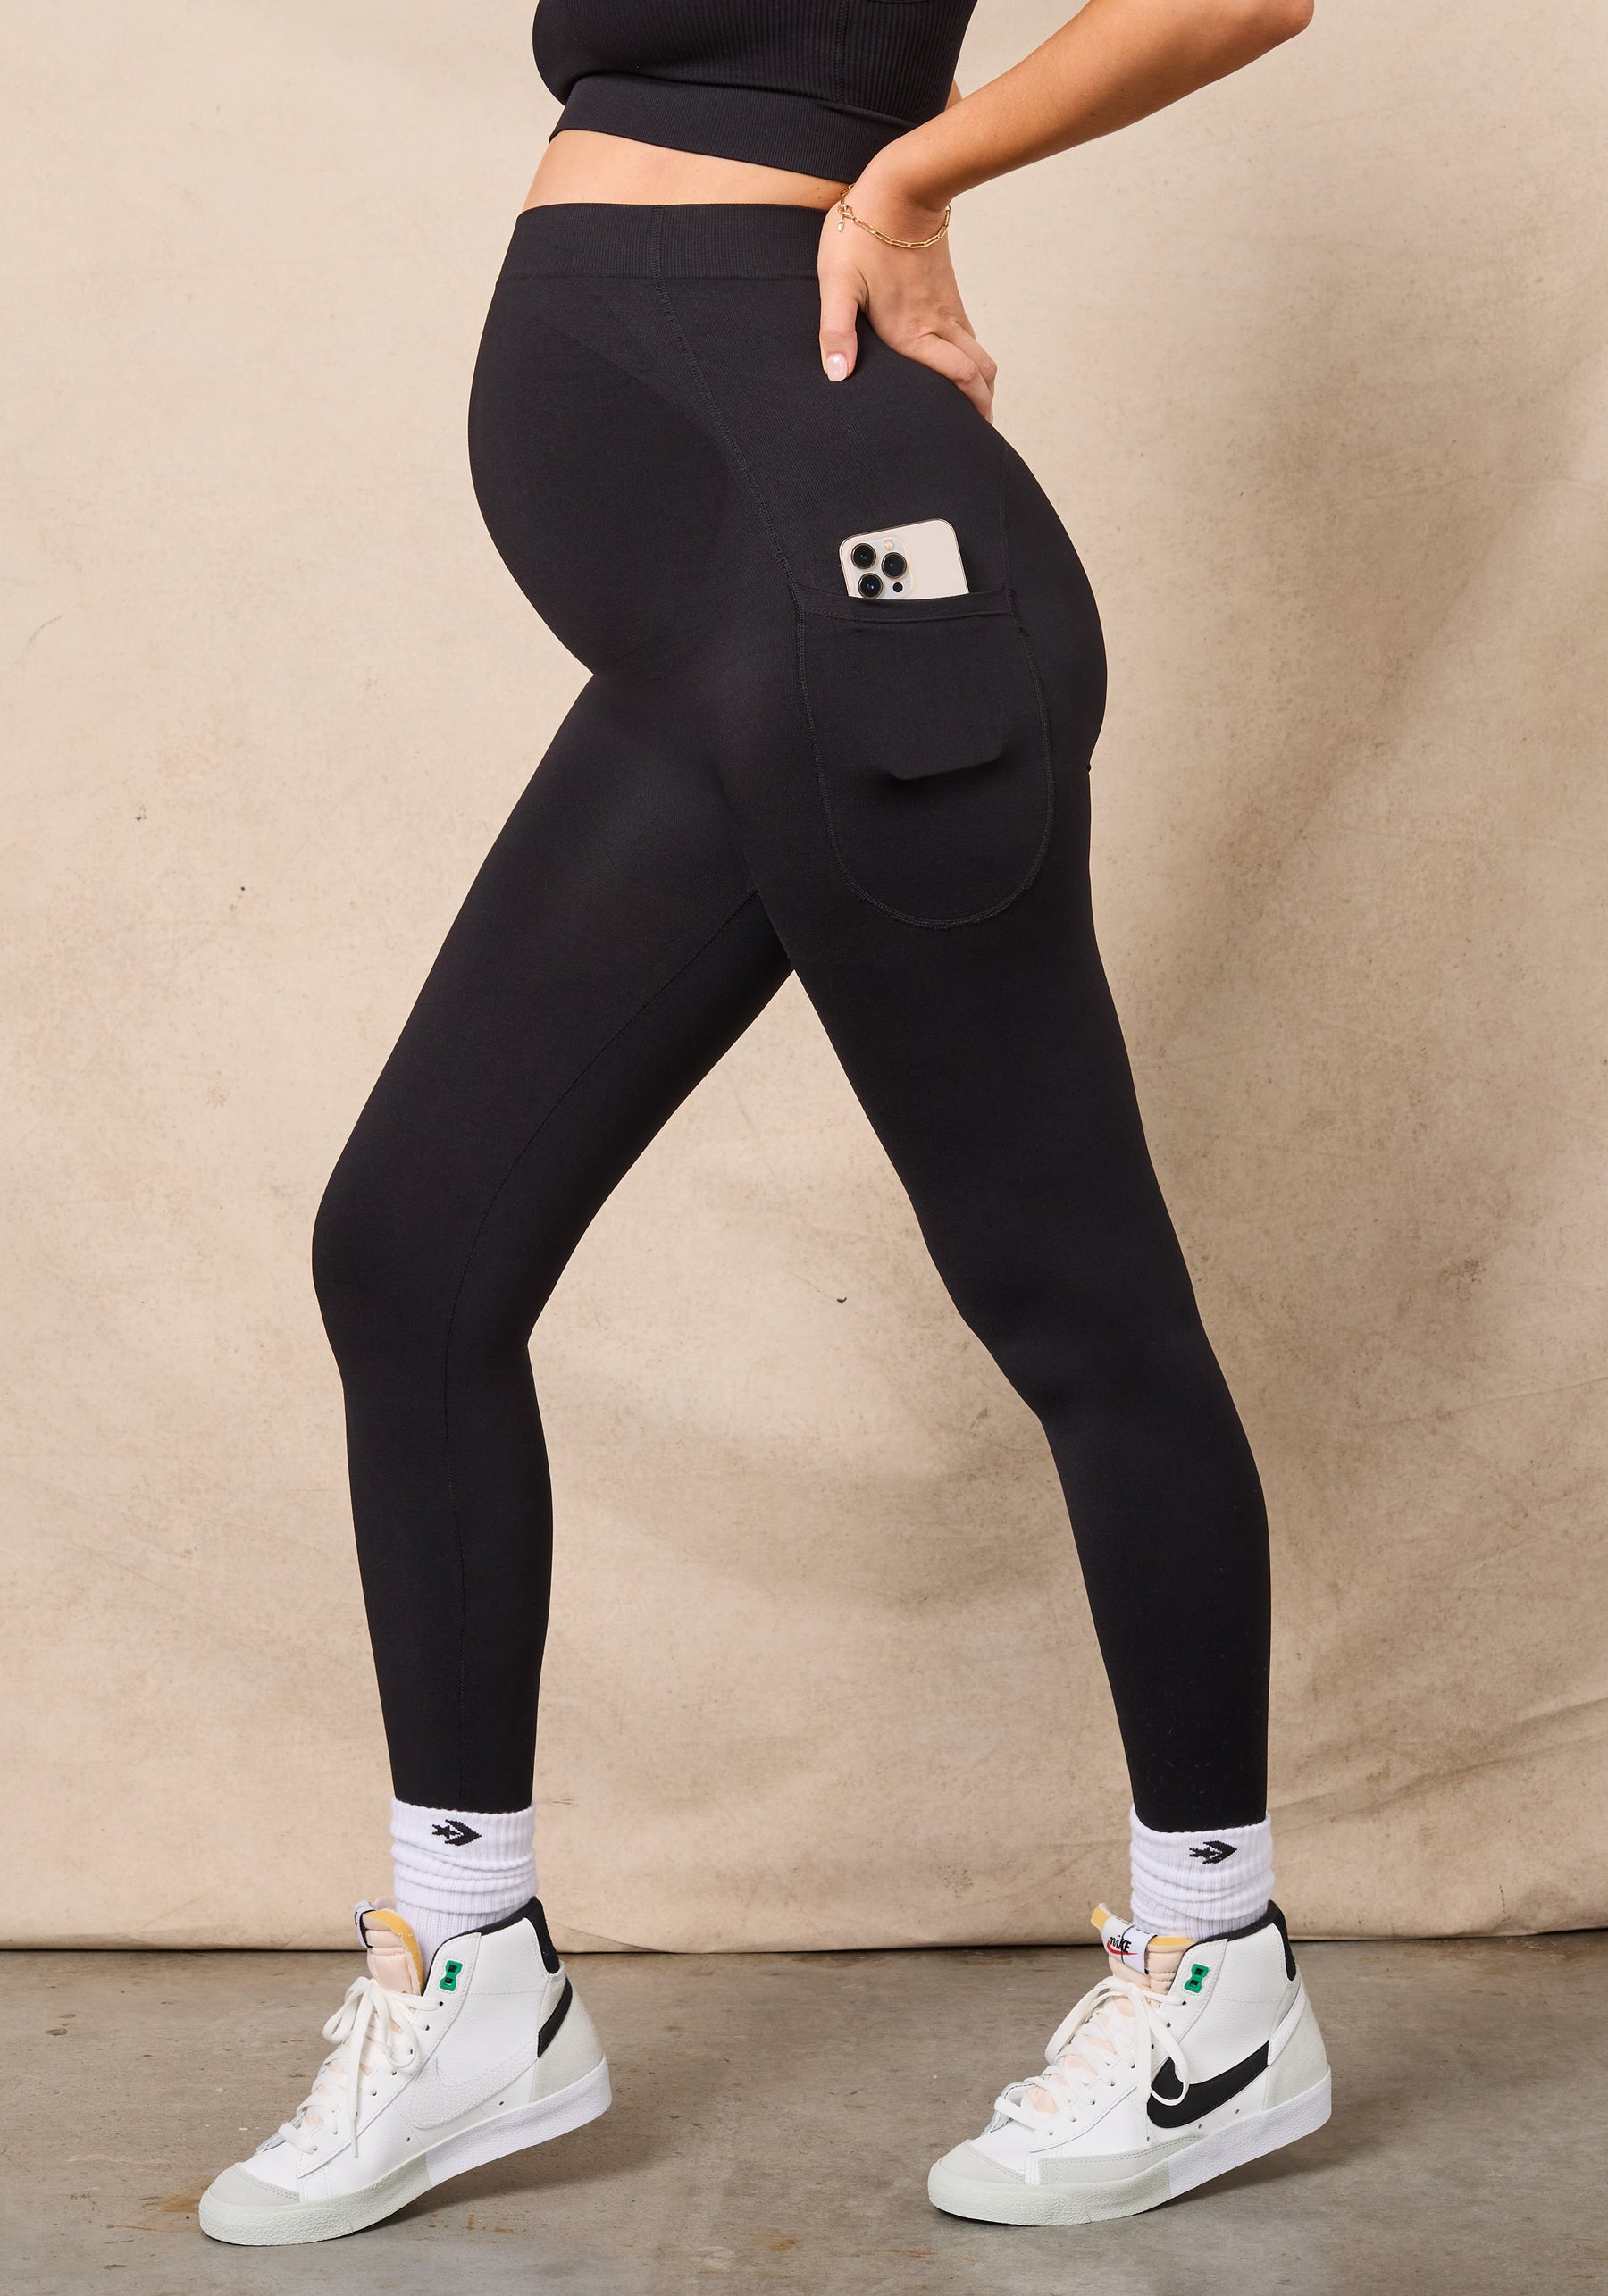  Leggings Depot Womens Maternity Leggings Over The Belly  Pregnancy Casual Yoga Tights-R707